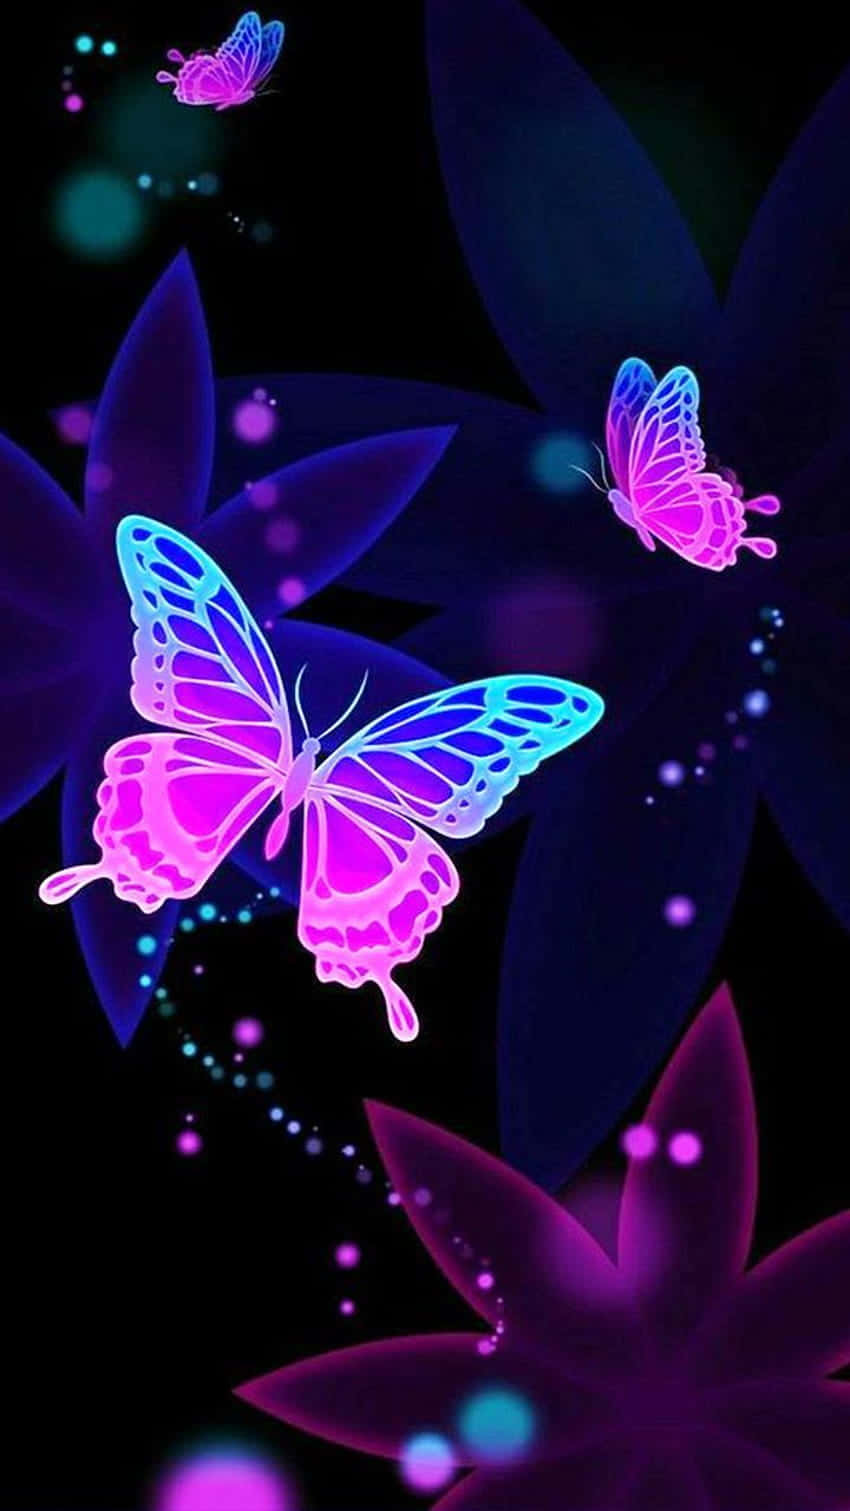 A Black Background With Pink And Blue Butterflies Wallpaper